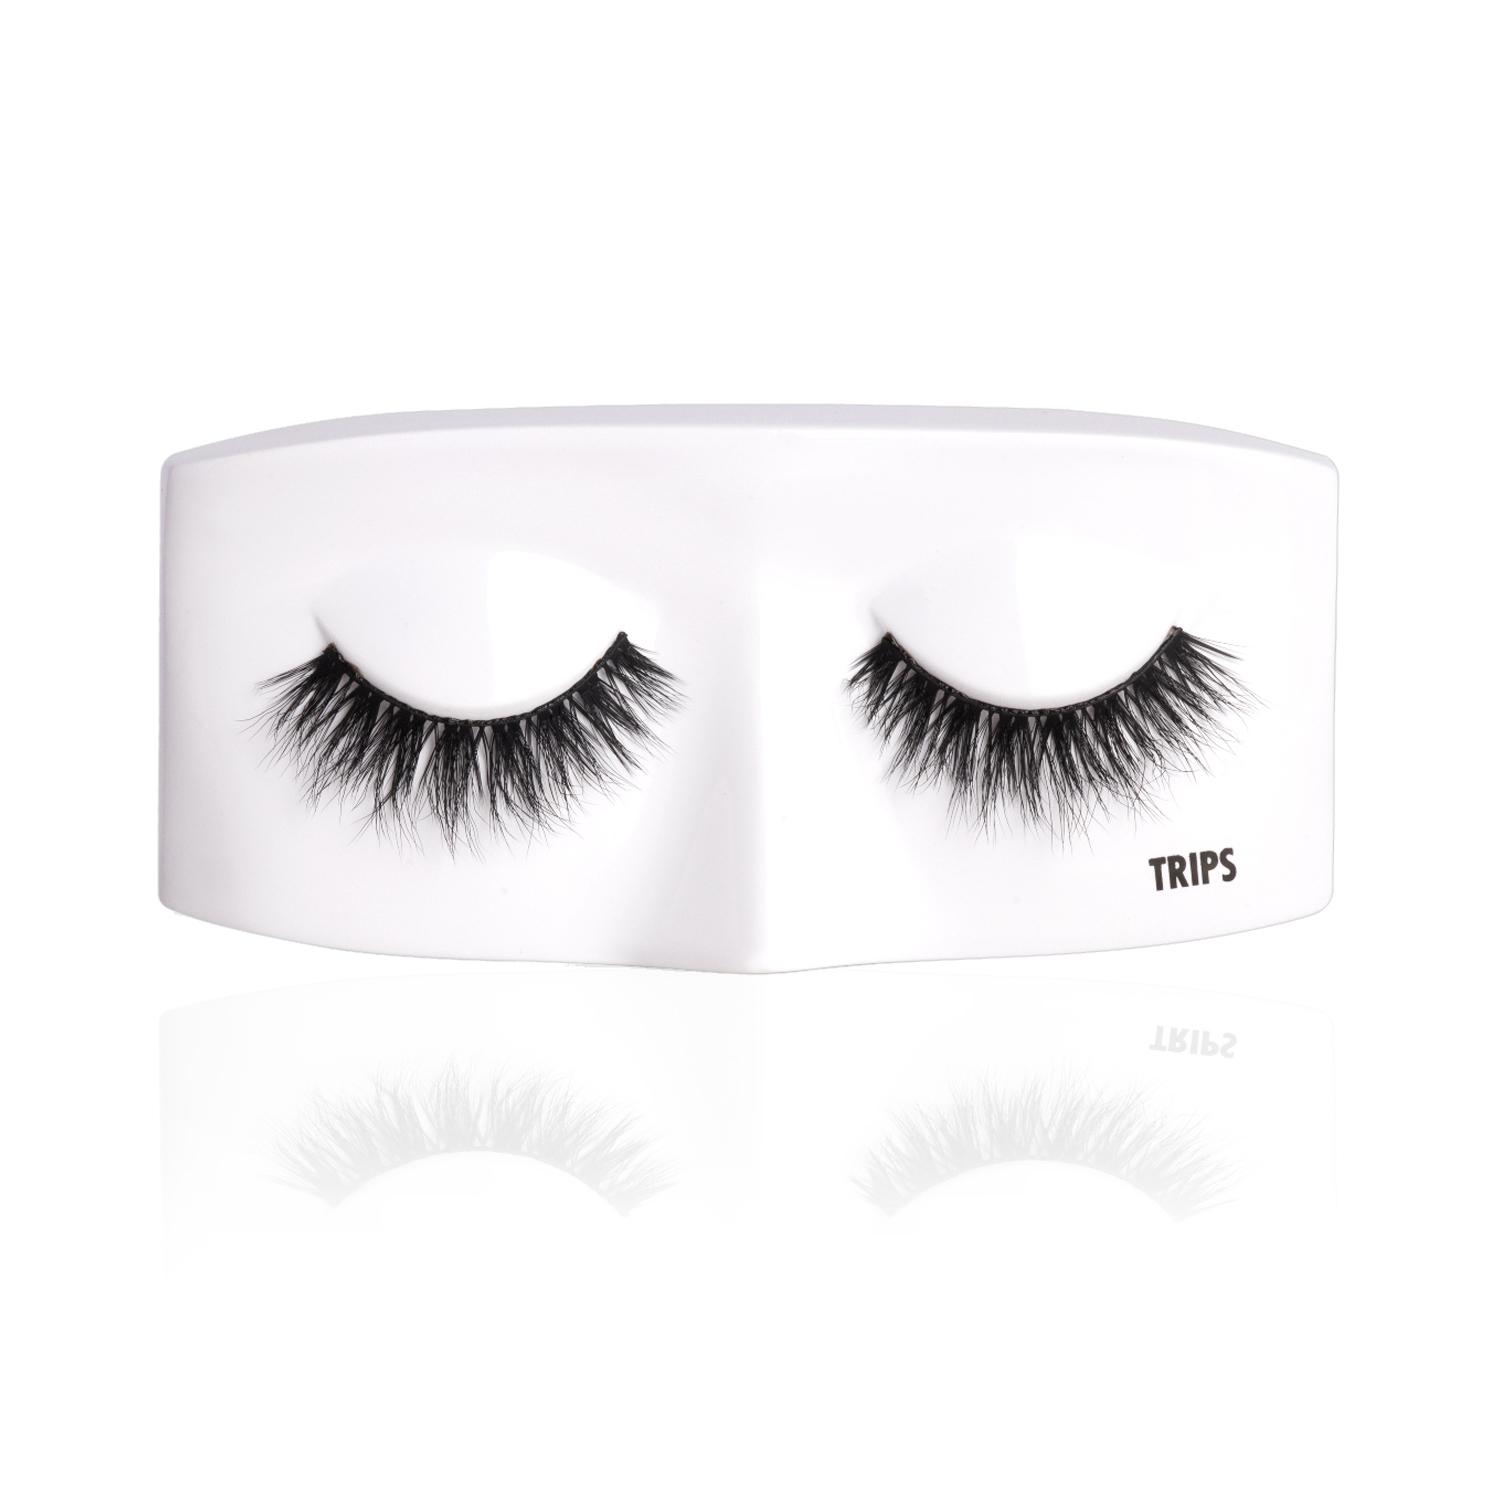 PAC | PAC Ace Of Lashes - Trips (1 Pair)